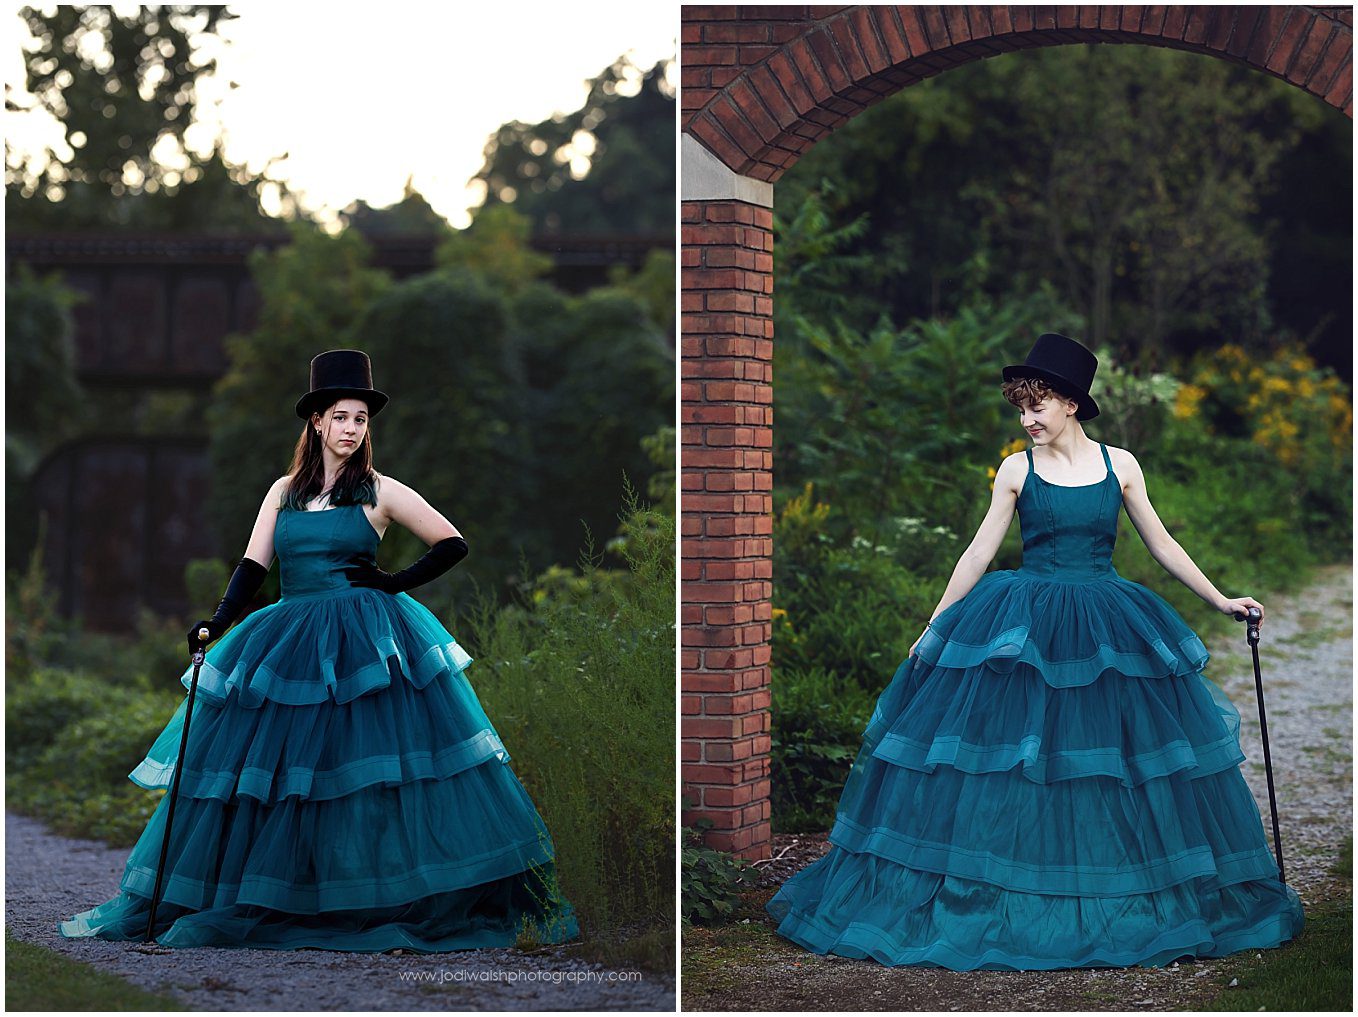 images of two teens, each wearing a teal gown with layers of tulle in the skirt.  They also are wearing a top hat and holding a black cane.